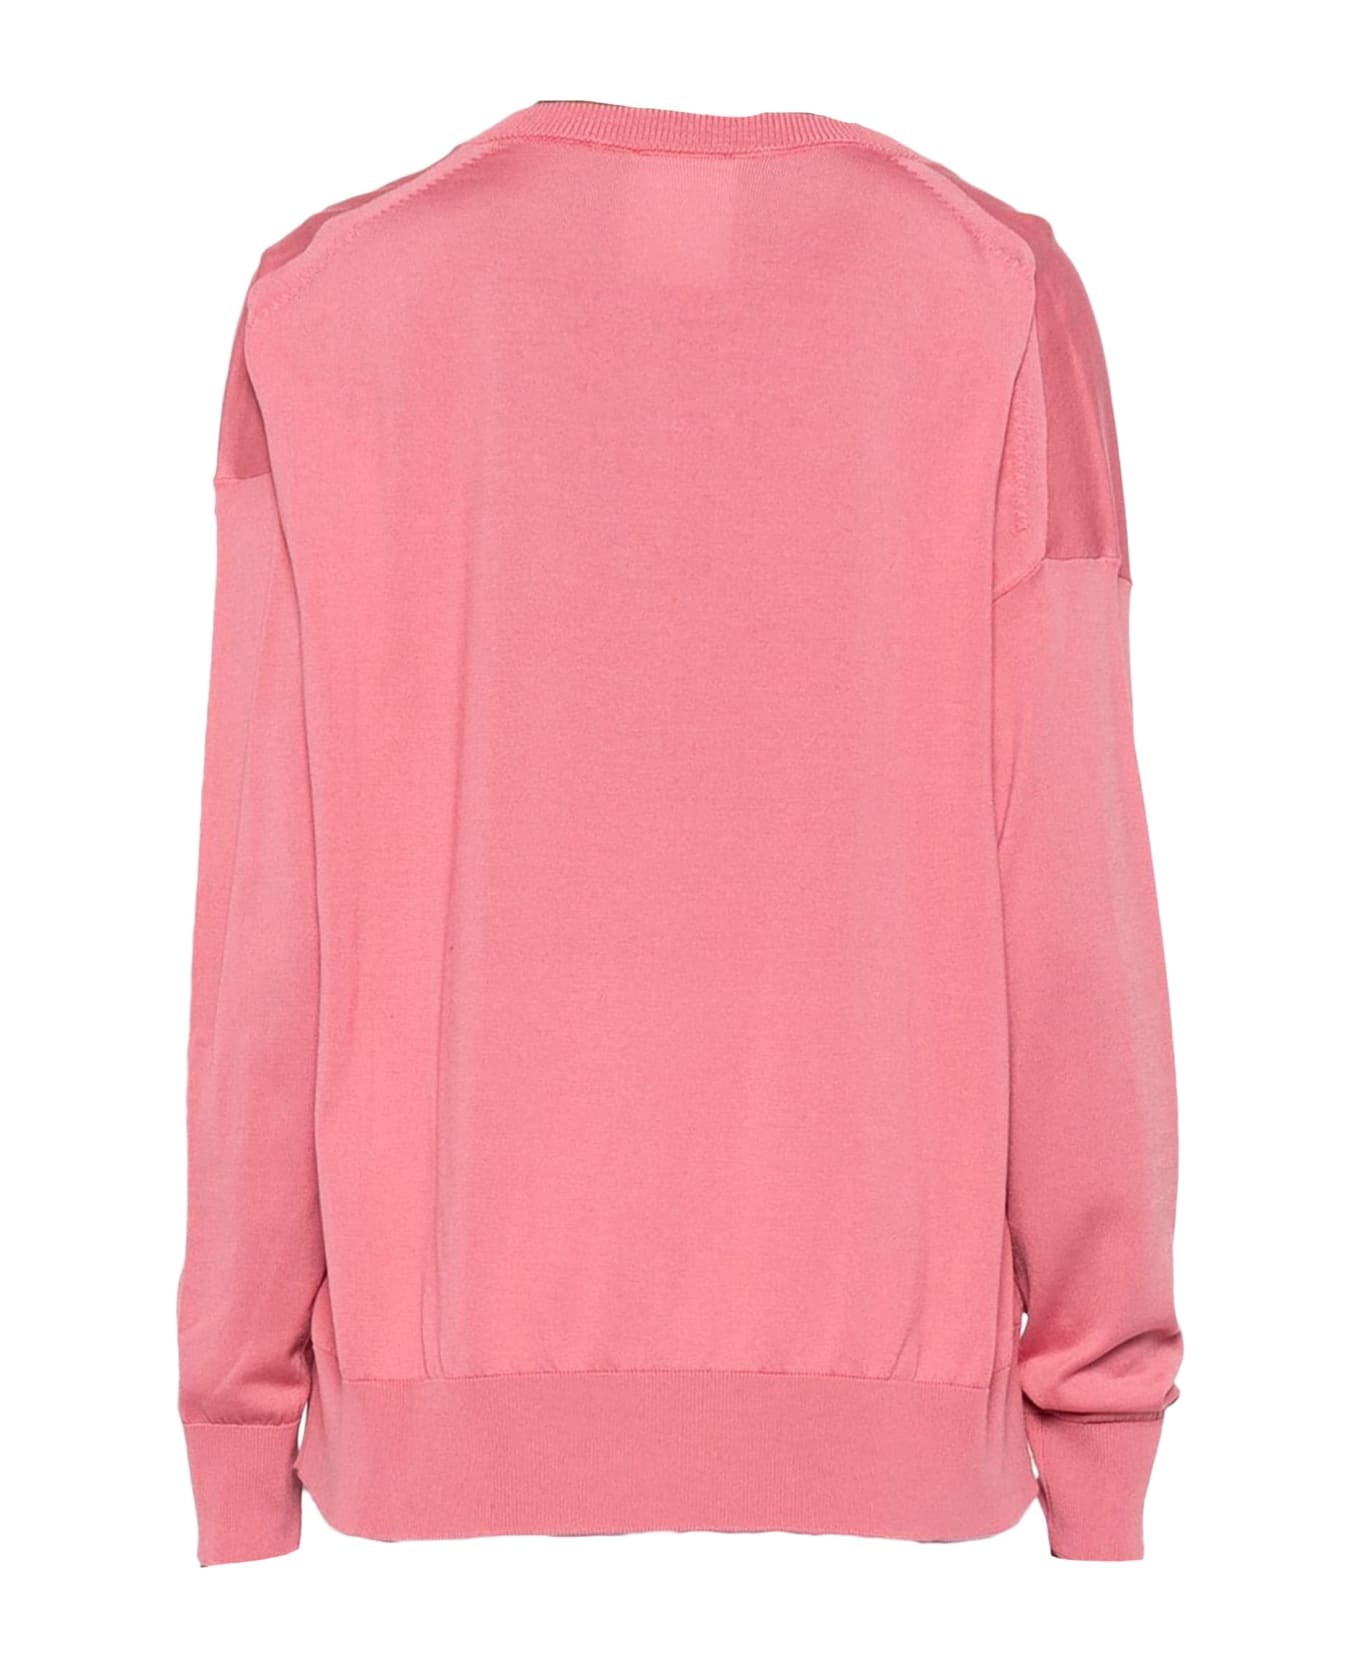 SEMICOUTURE Pink Cotton Sweater - Pink